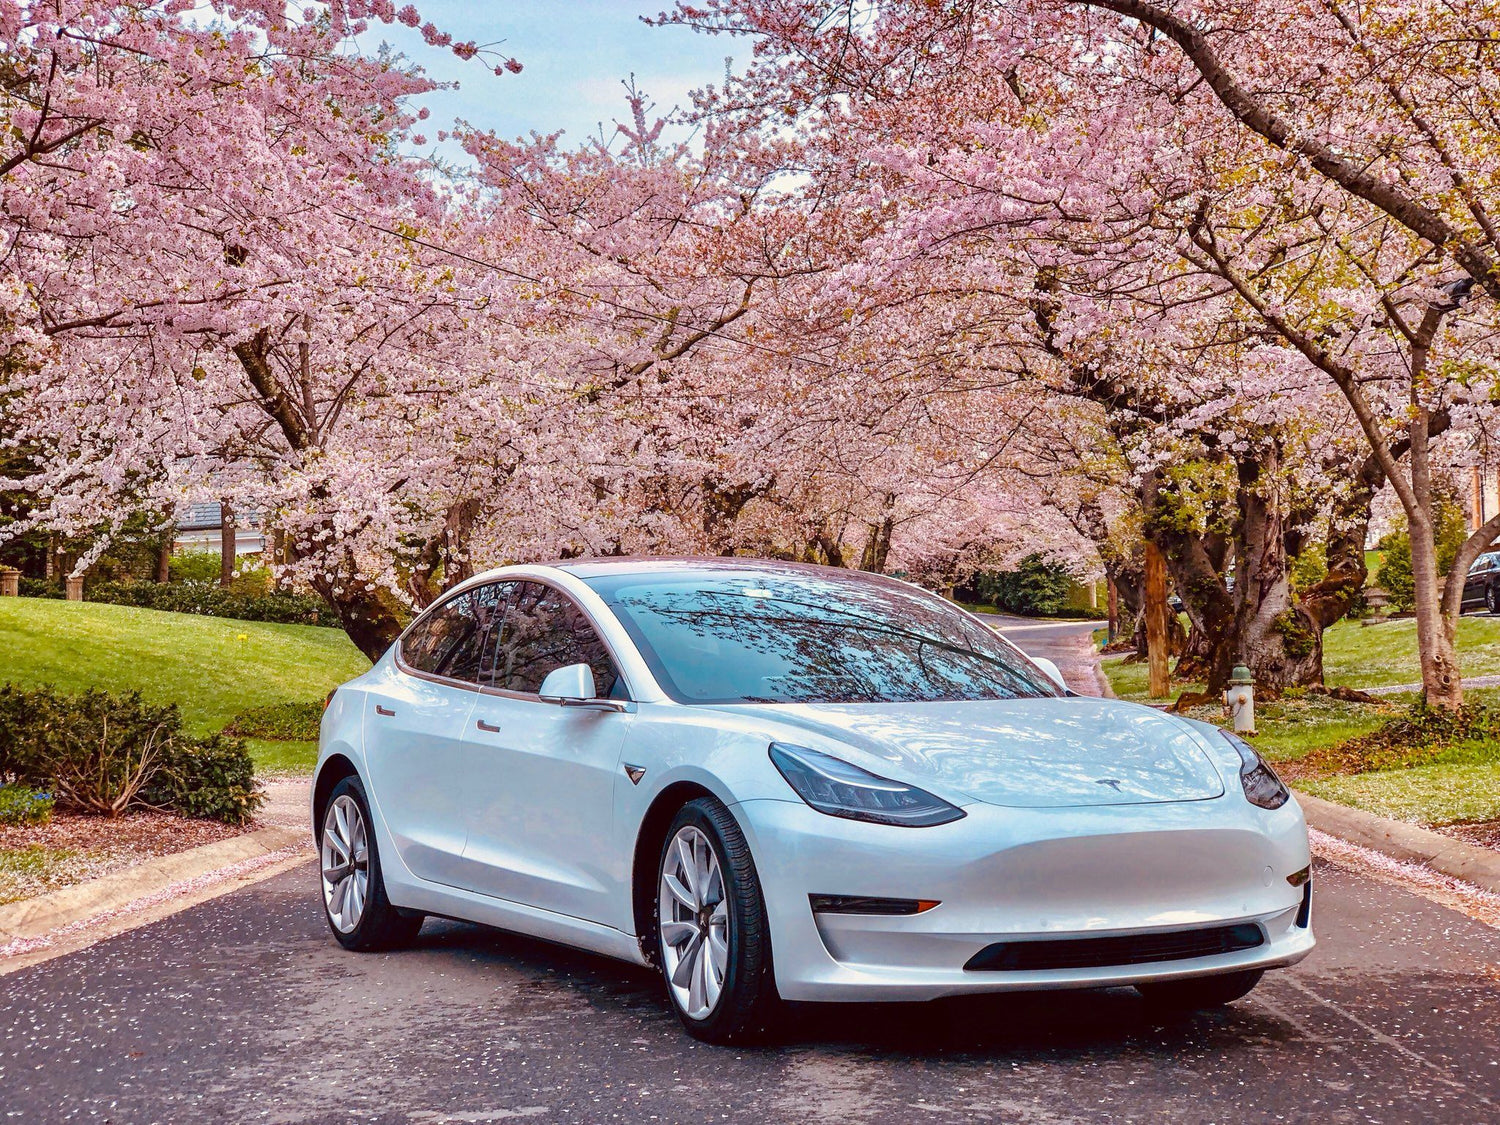 Tesla Model 3 In China Receives Least Complaints vs Top-Selling ICE Cars & EVs